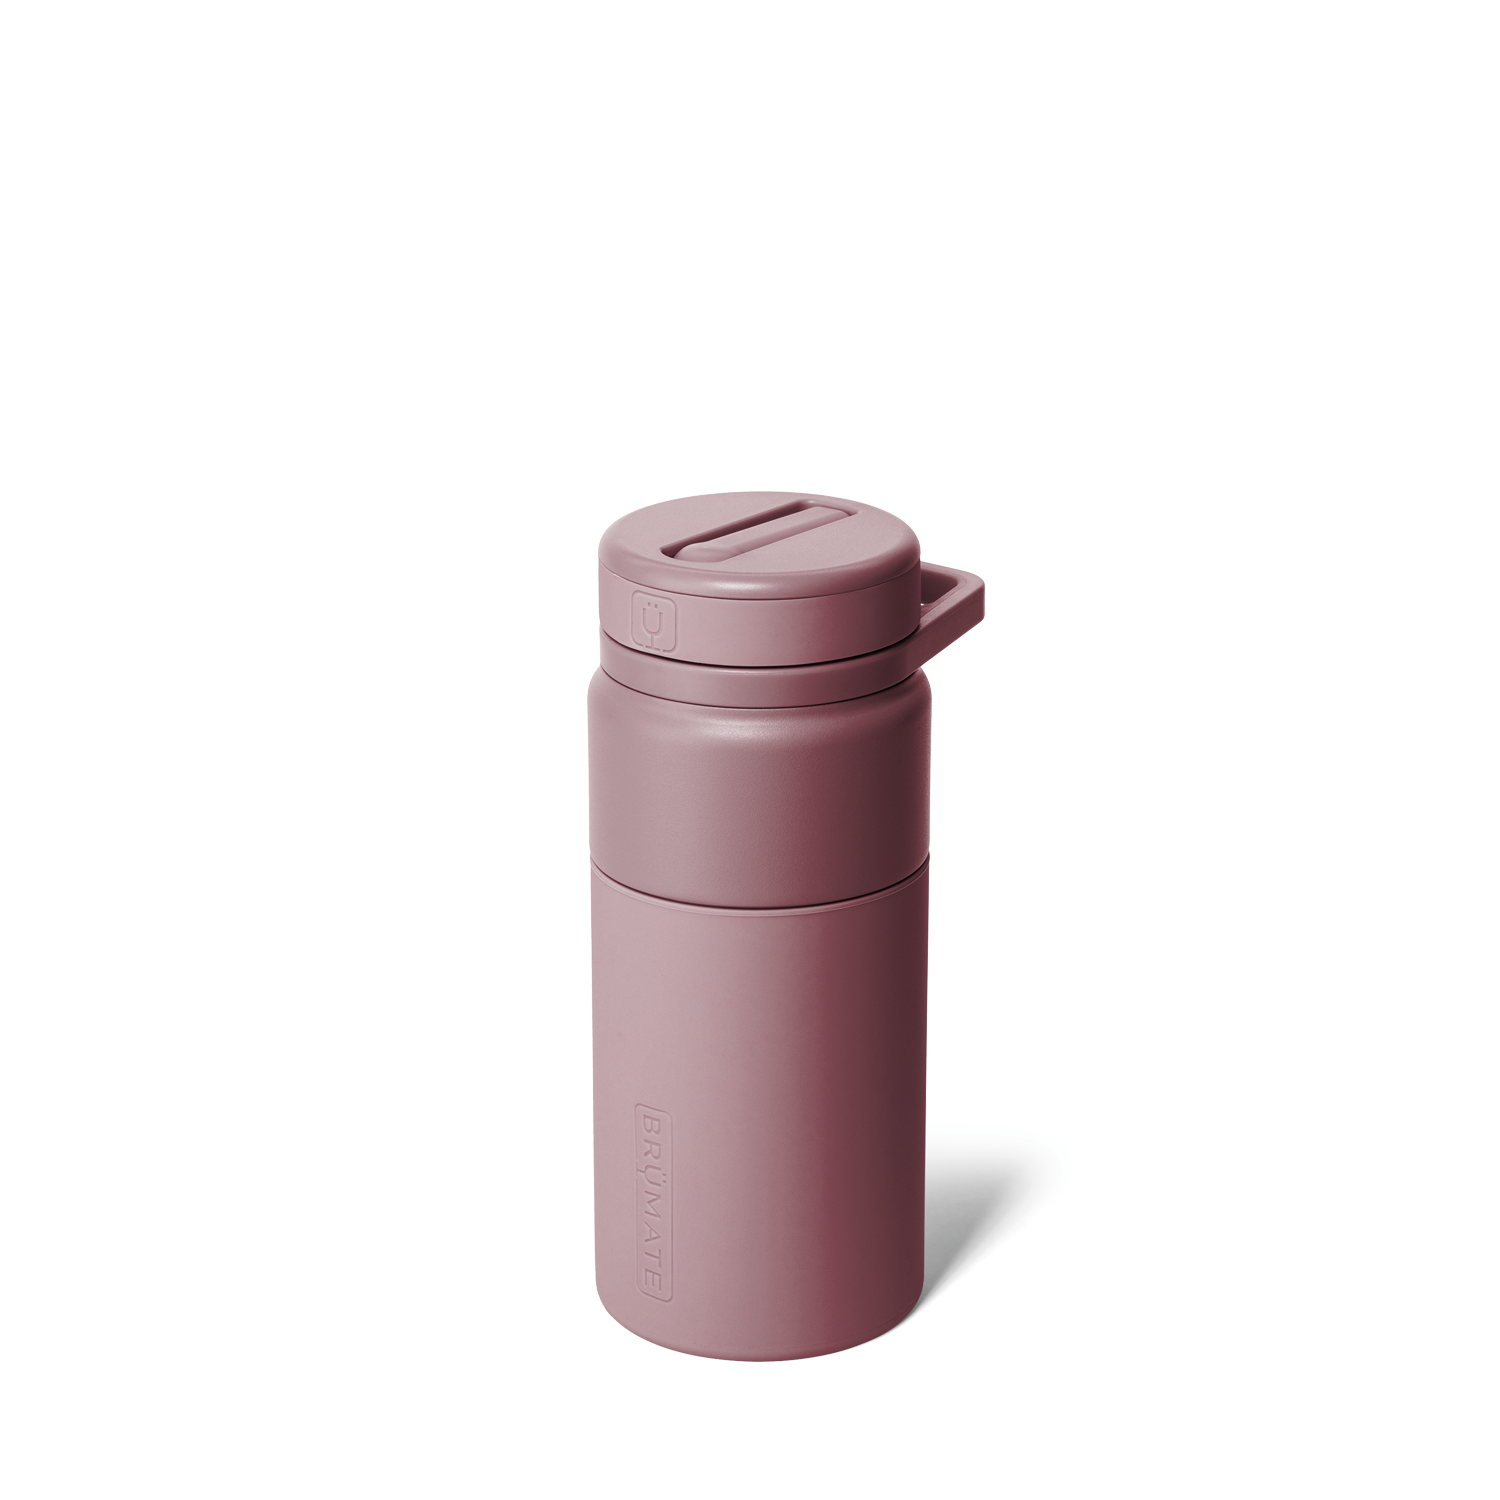 https://cdn.shopify.com/s/files/1/1114/2308/files/rotera-15-rose-taupe.png?v=1686343982